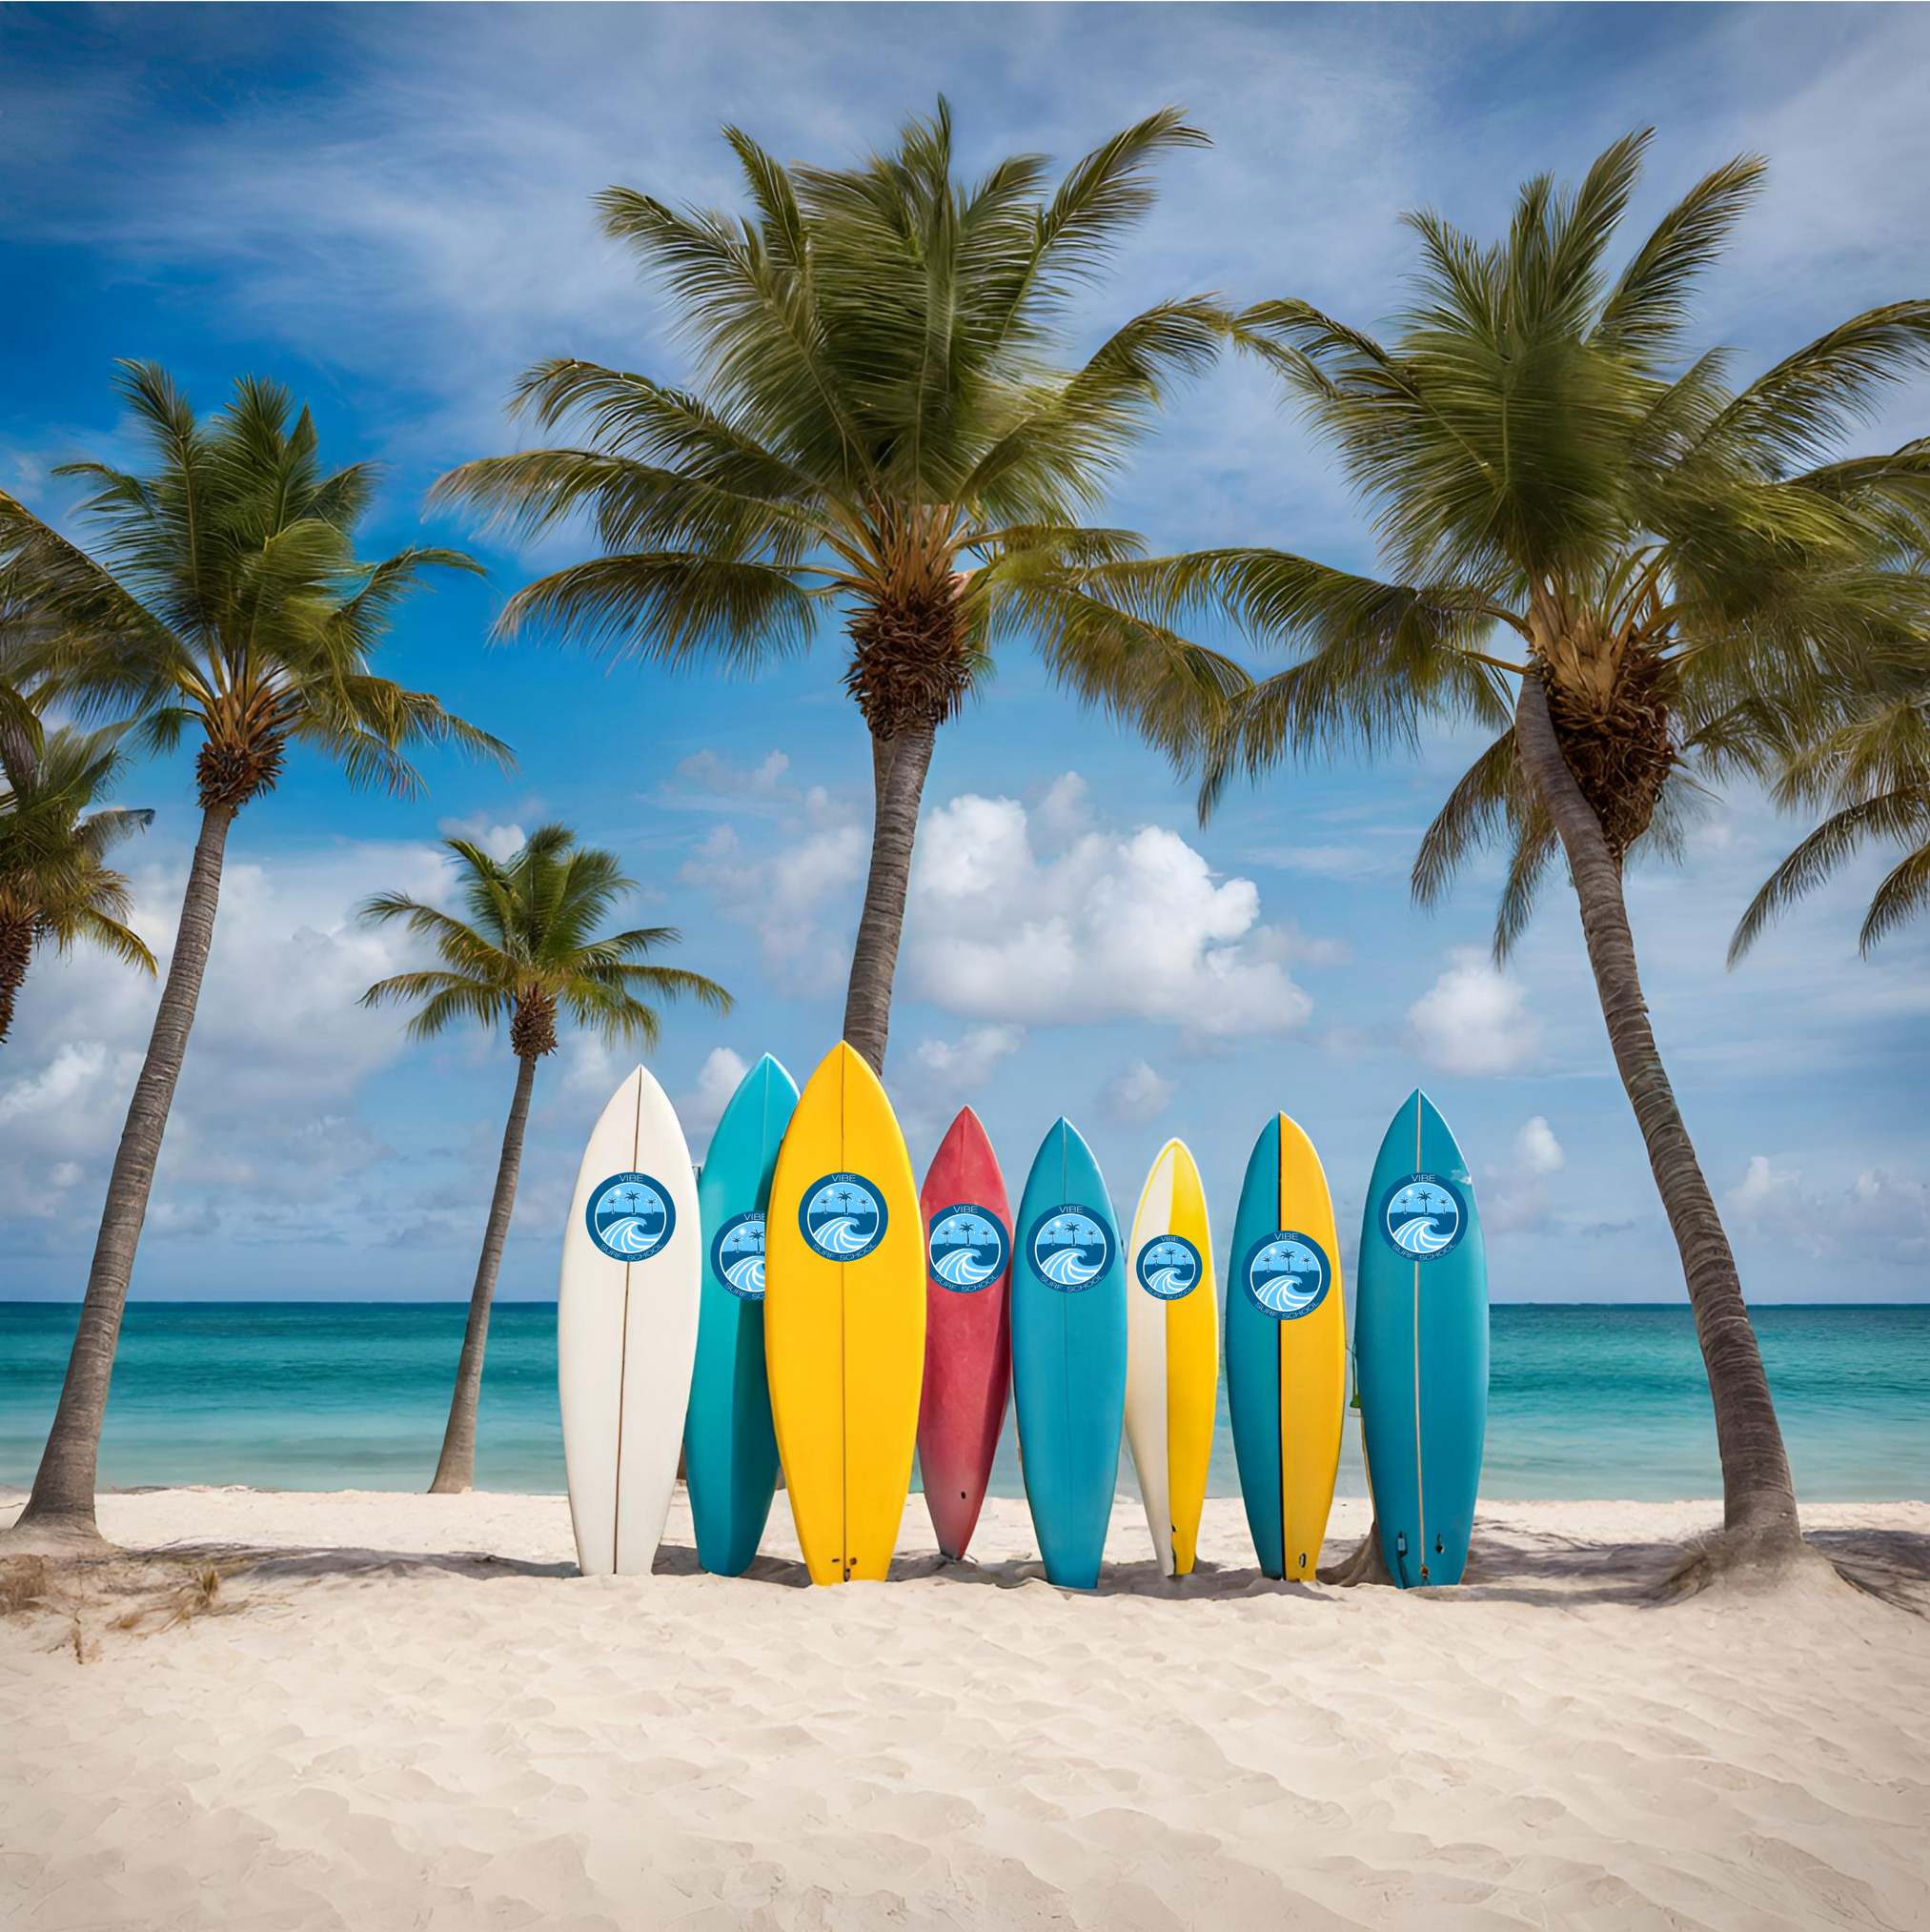 Surfboards in Fort Lauderdale Florida